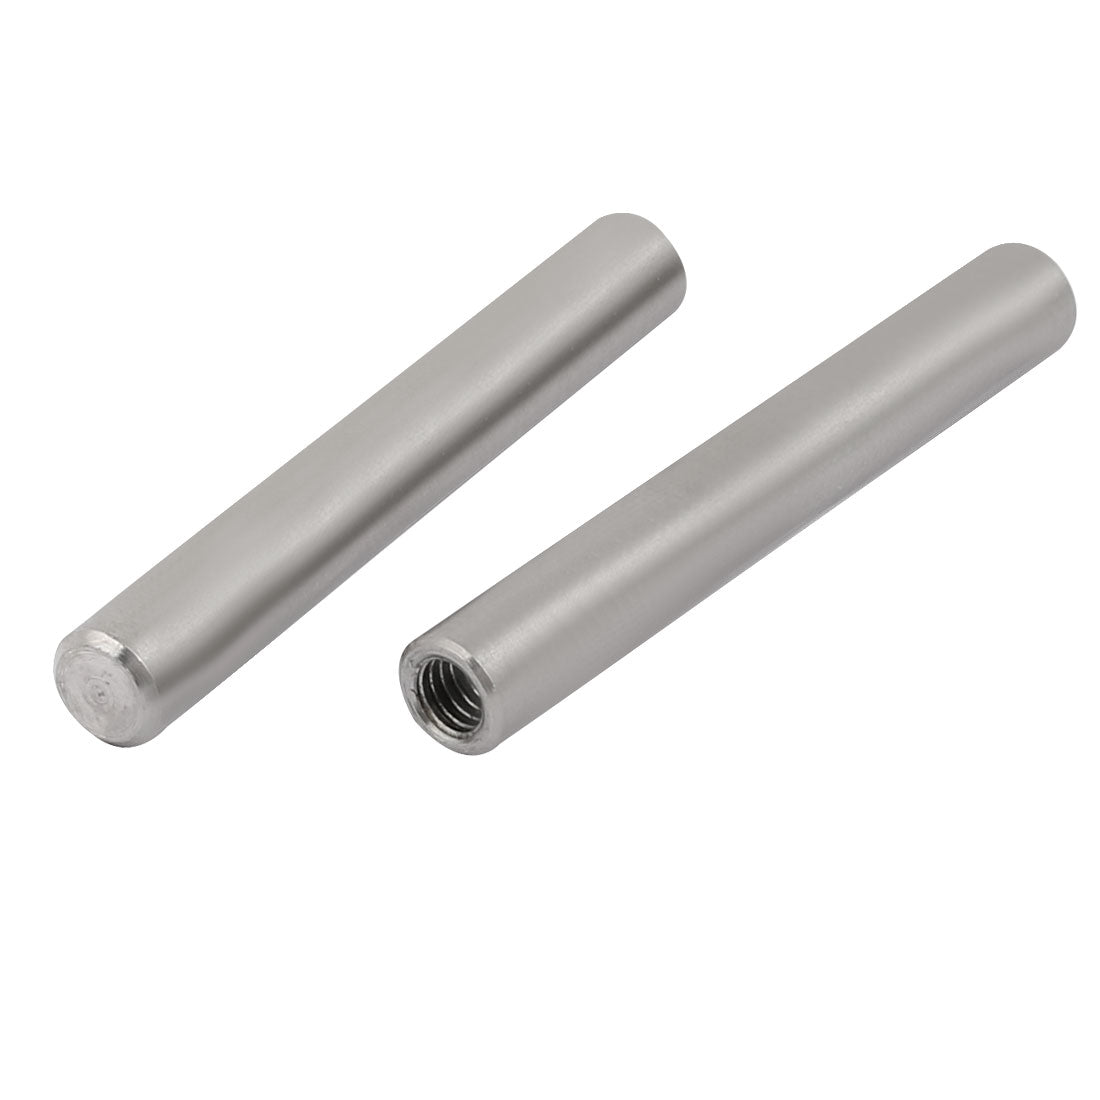 uxcell Uxcell 304 Stainless Steel M4 Female Thread 6mm x 45mm Cylindrical Dowel Pin 2pcs